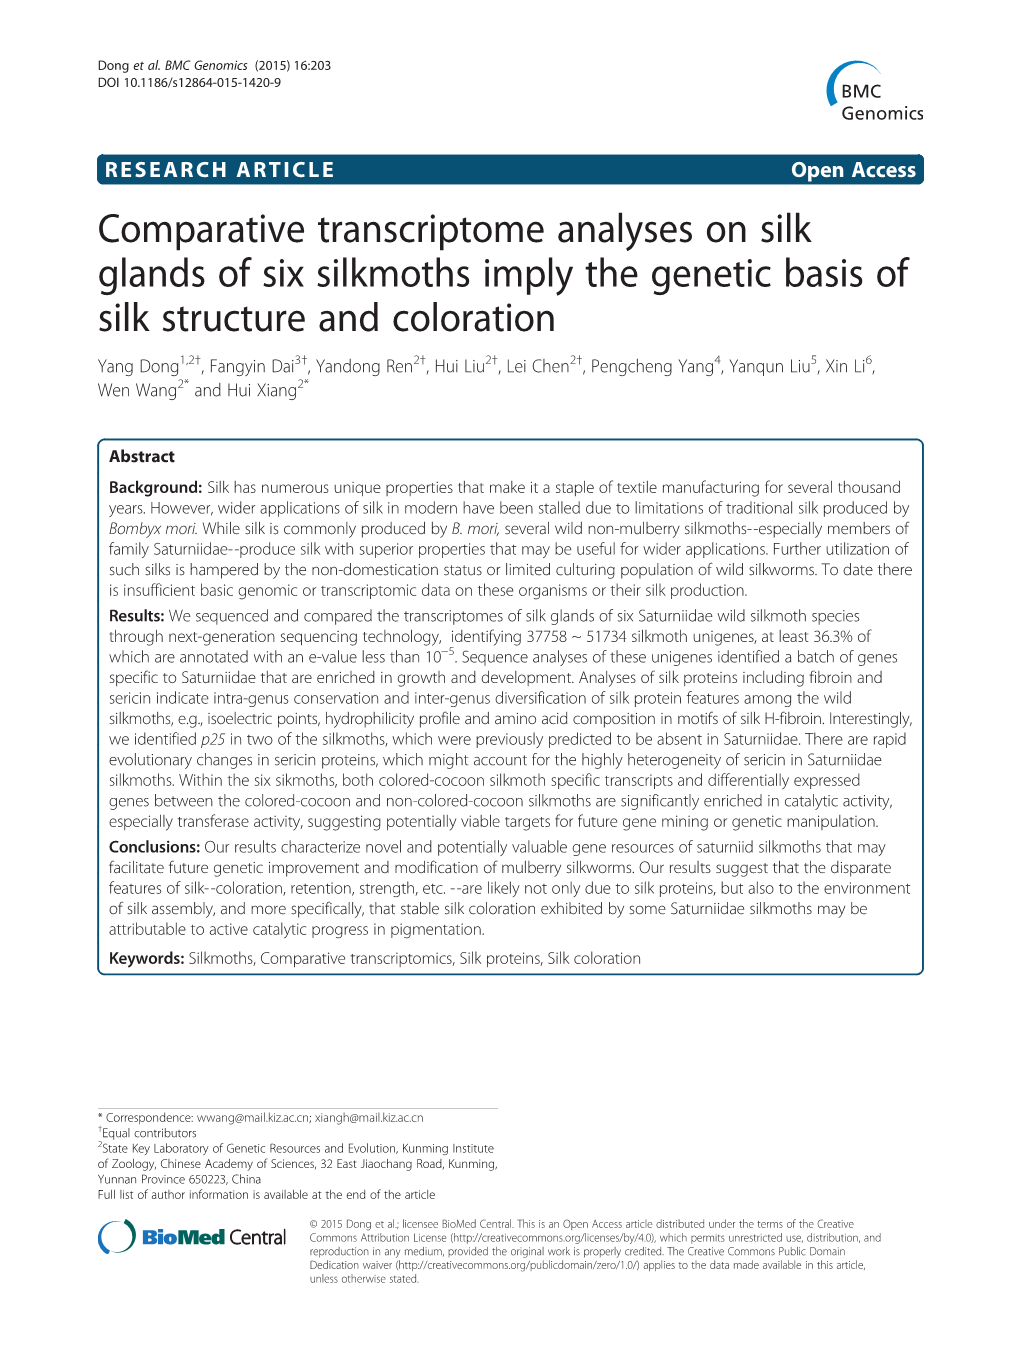 Comparative Transcriptome Analyses on Silk Glands of Six Silkmoths Imply the Genetic Basis of Silk Structure and Coloration